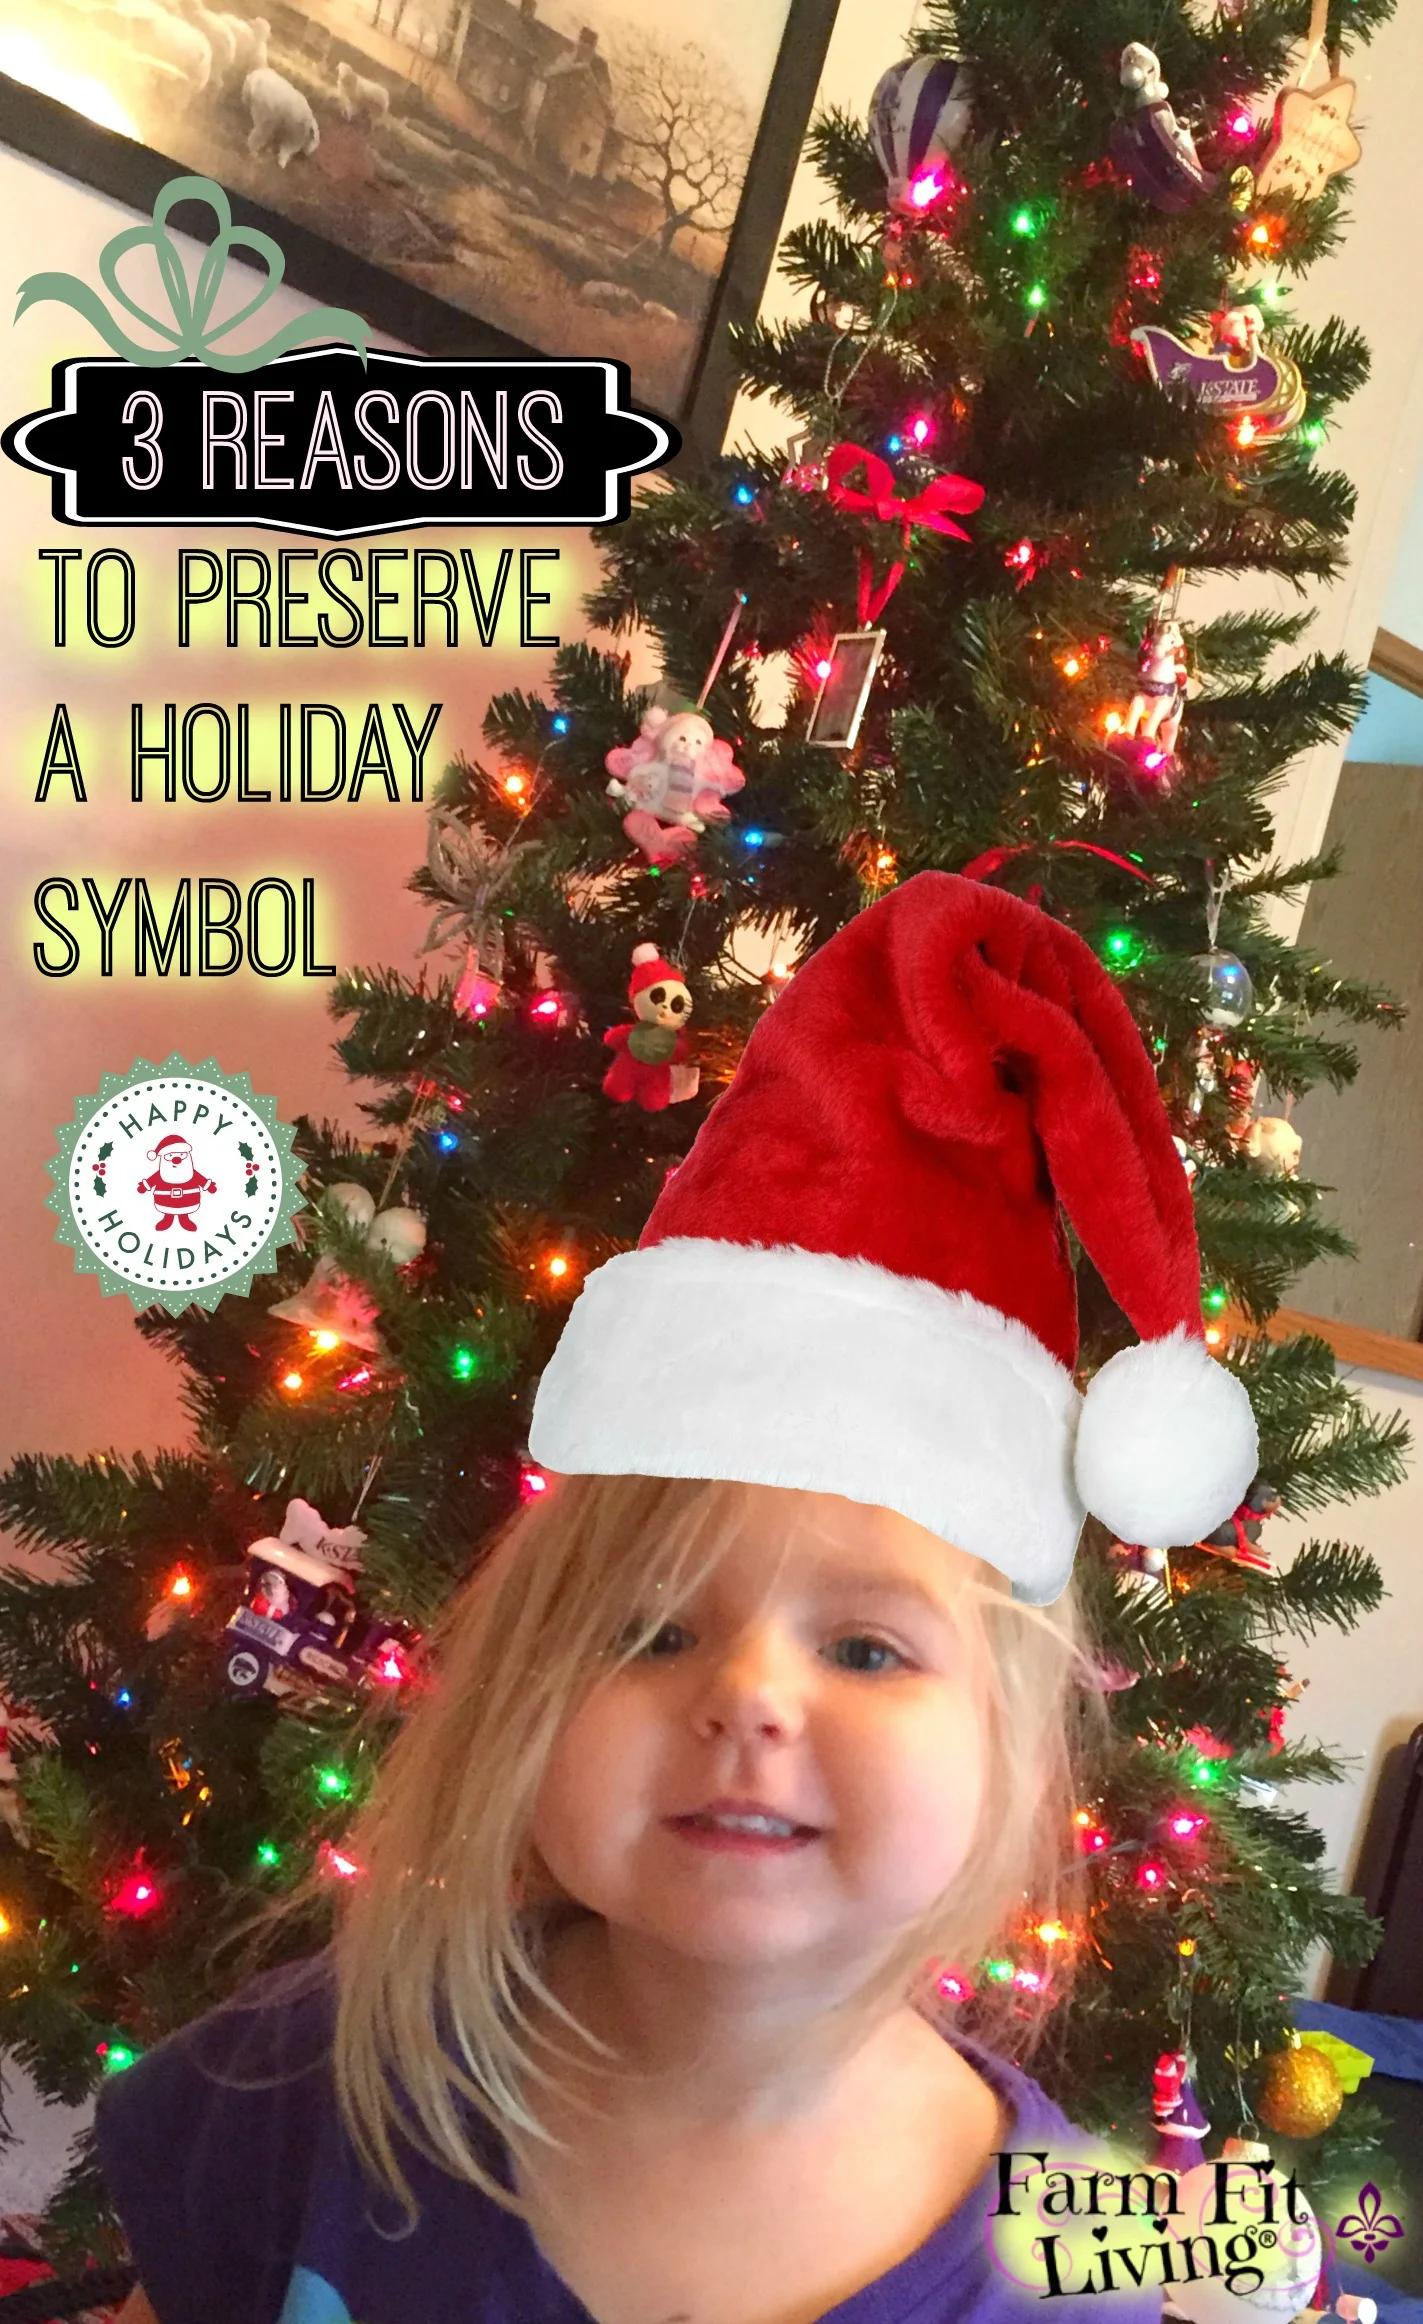 3 Reasons to Preserve a holiday symbol